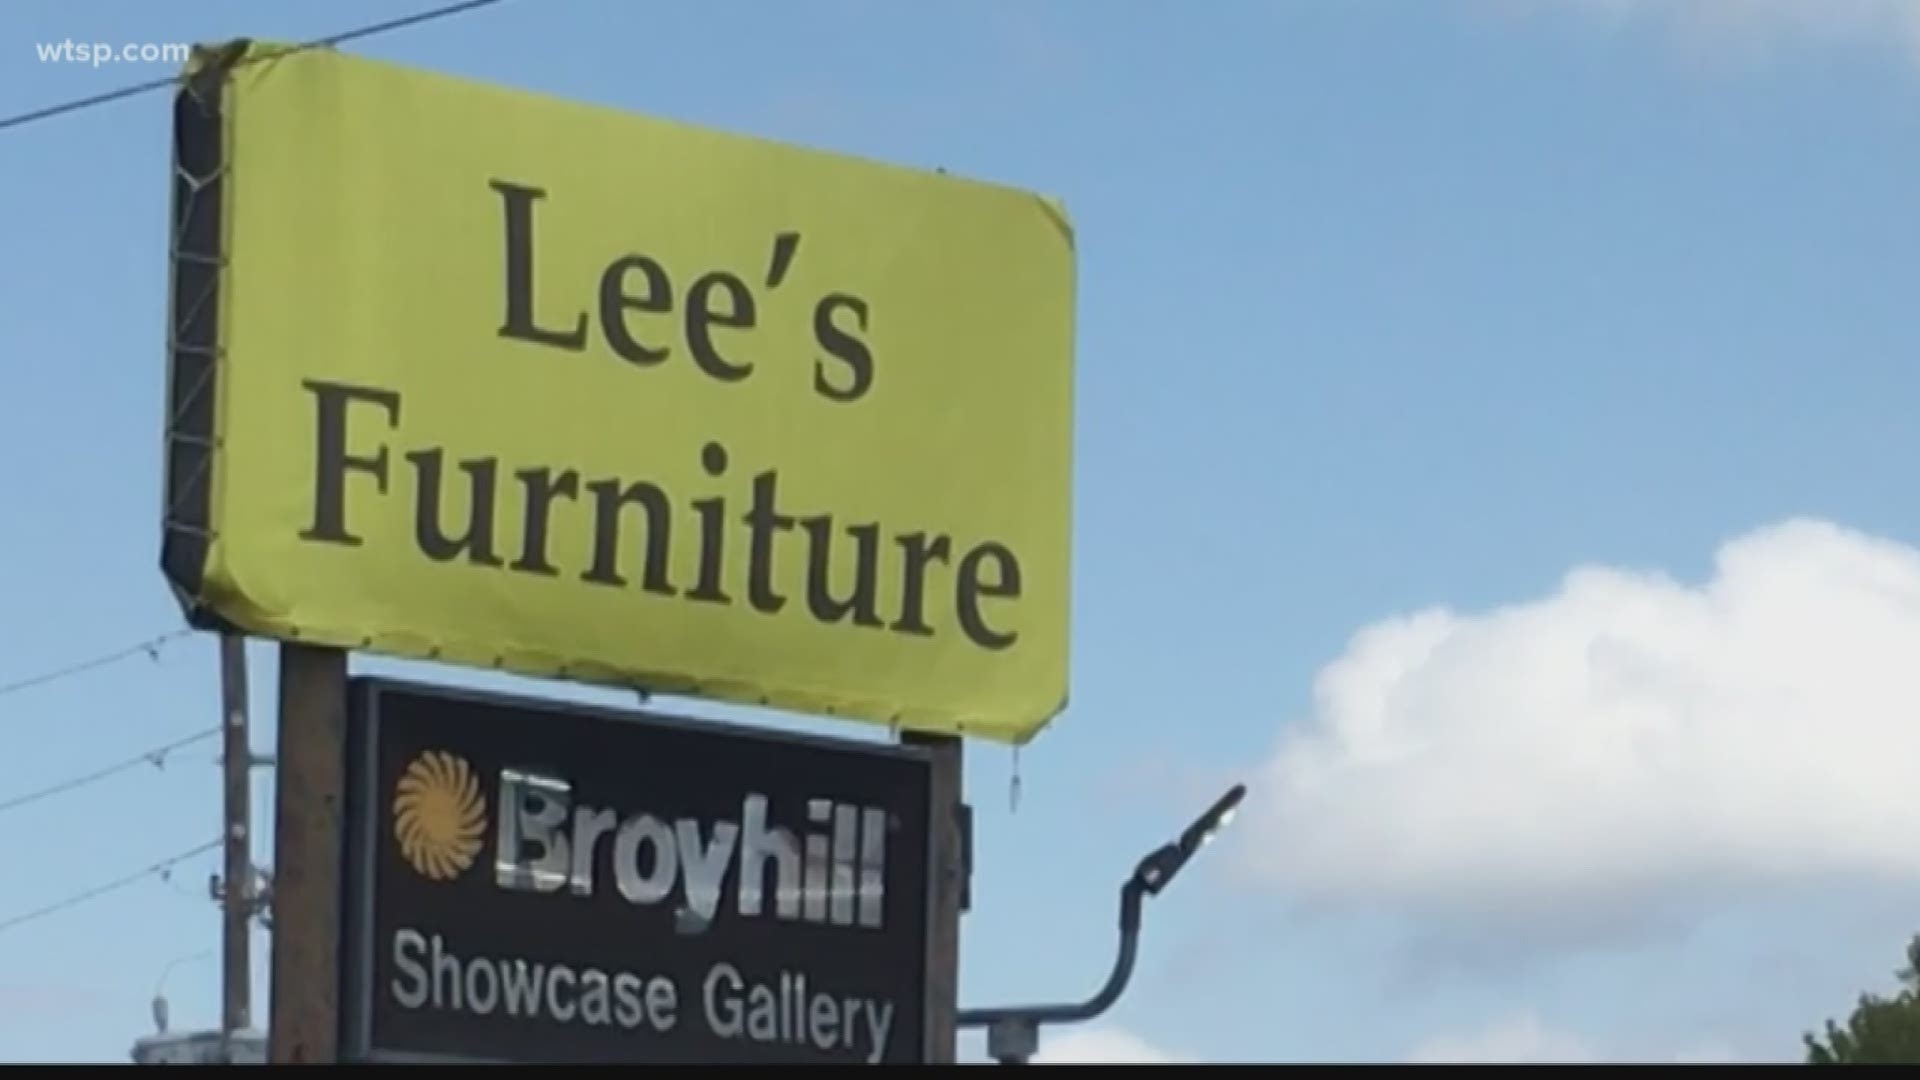 The chairs were ordered on June 8, 2018. Ruth Ann Milhouse paid Lee's Furniture in Sebring $909.25 -- half the price of the custom chairs. Two months later, in August, Ruth Ann says she still had no chairs.

The receipt from Lee's Furniture states backorders will take approximately 3 to 10 weeks. September came and went and still no chairs. Then, in October, Robert took a turn for the worse.